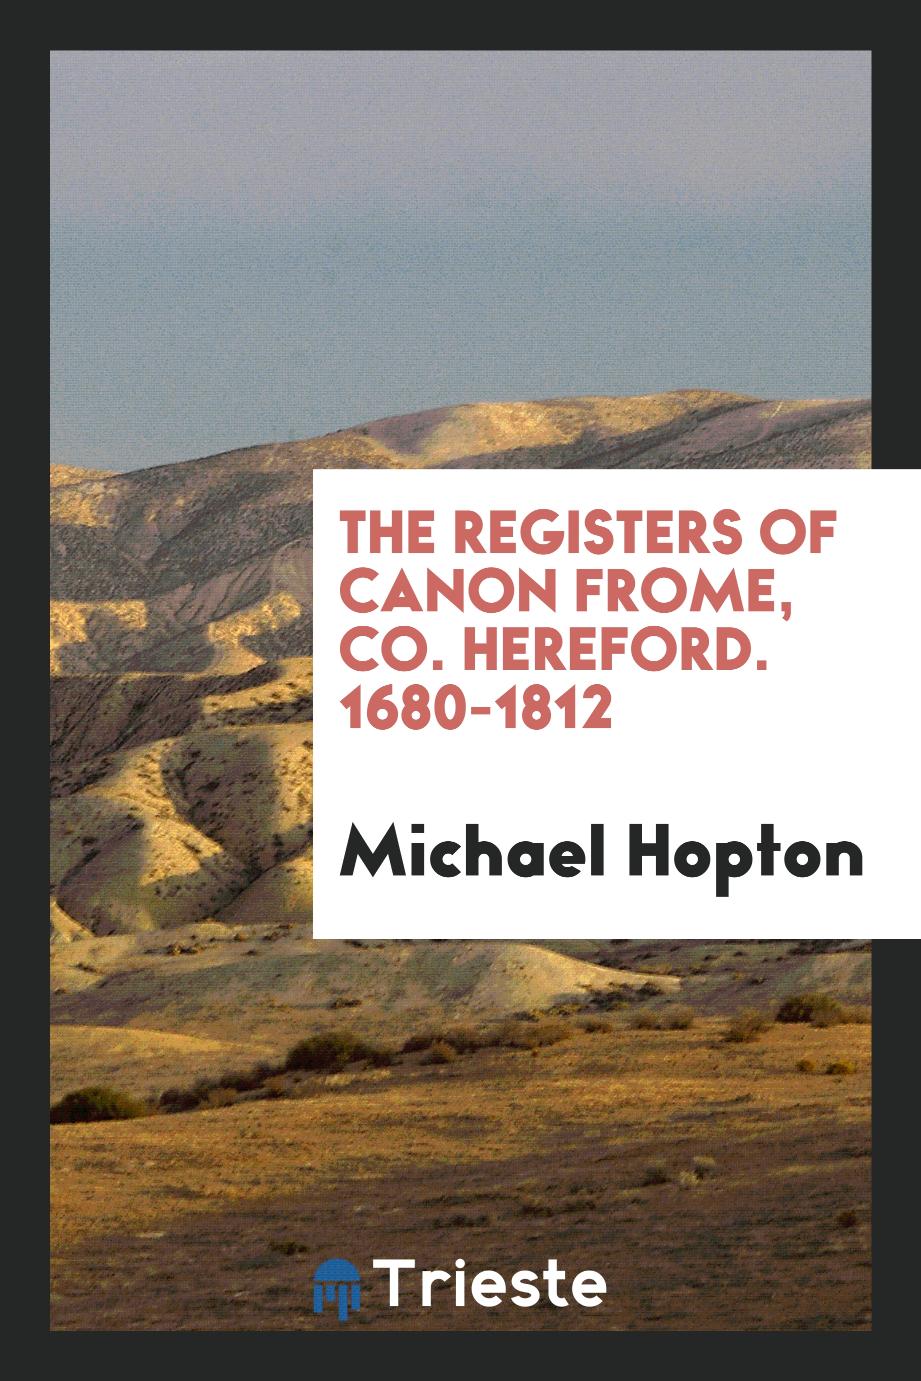 Michael Hopton - The registers of canon frome, Co. Hereford. 1680-1812